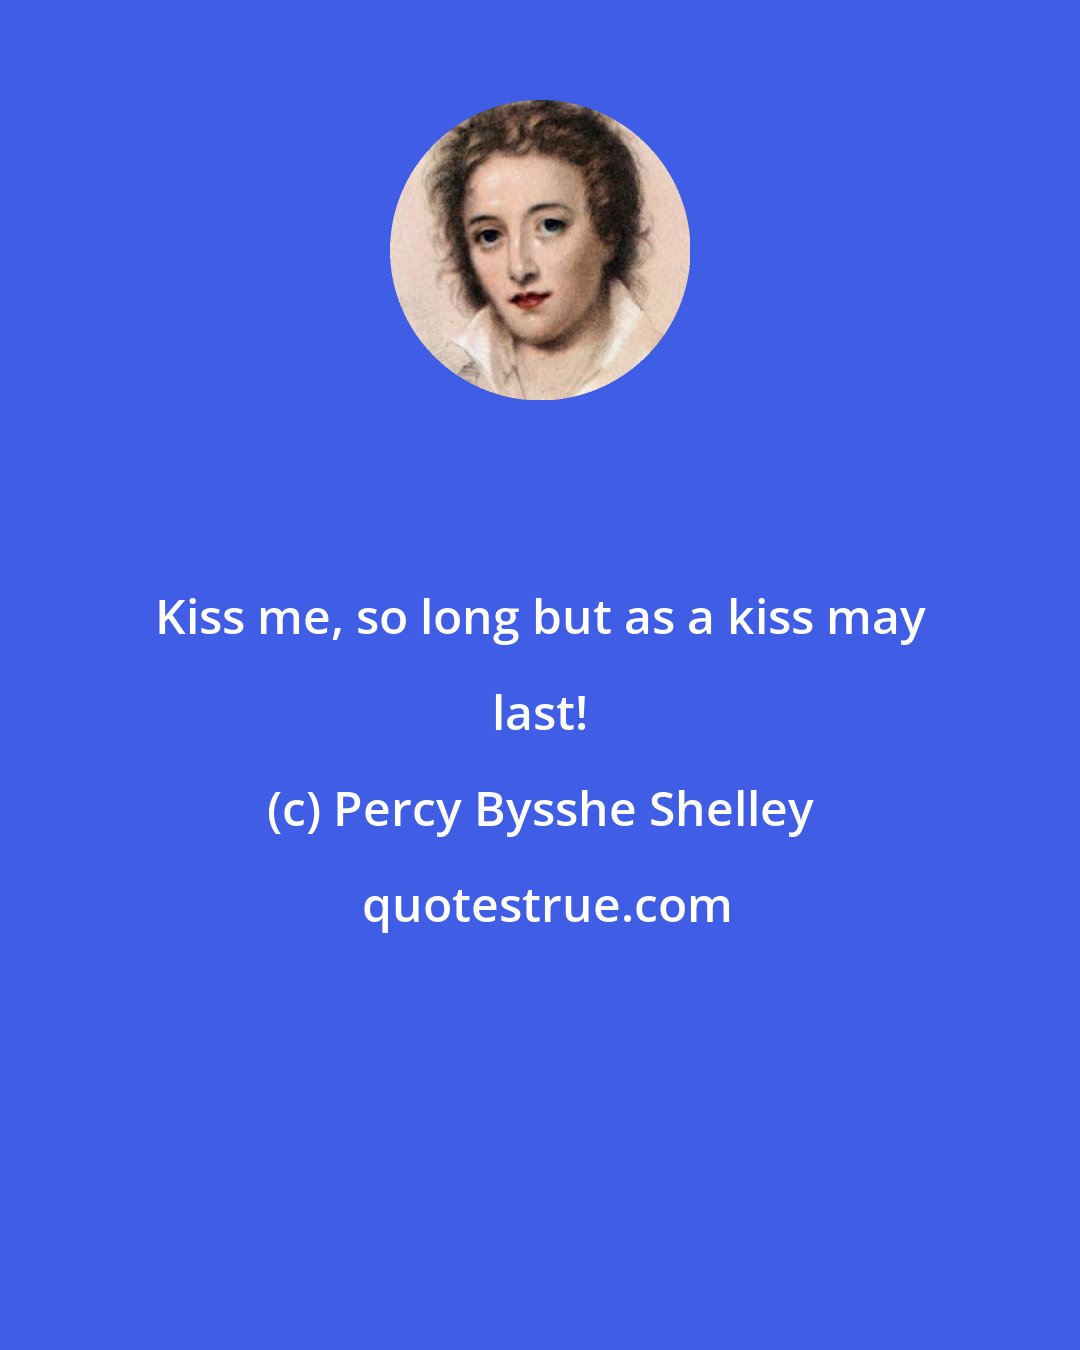 Percy Bysshe Shelley: Kiss me, so long but as a kiss may last!